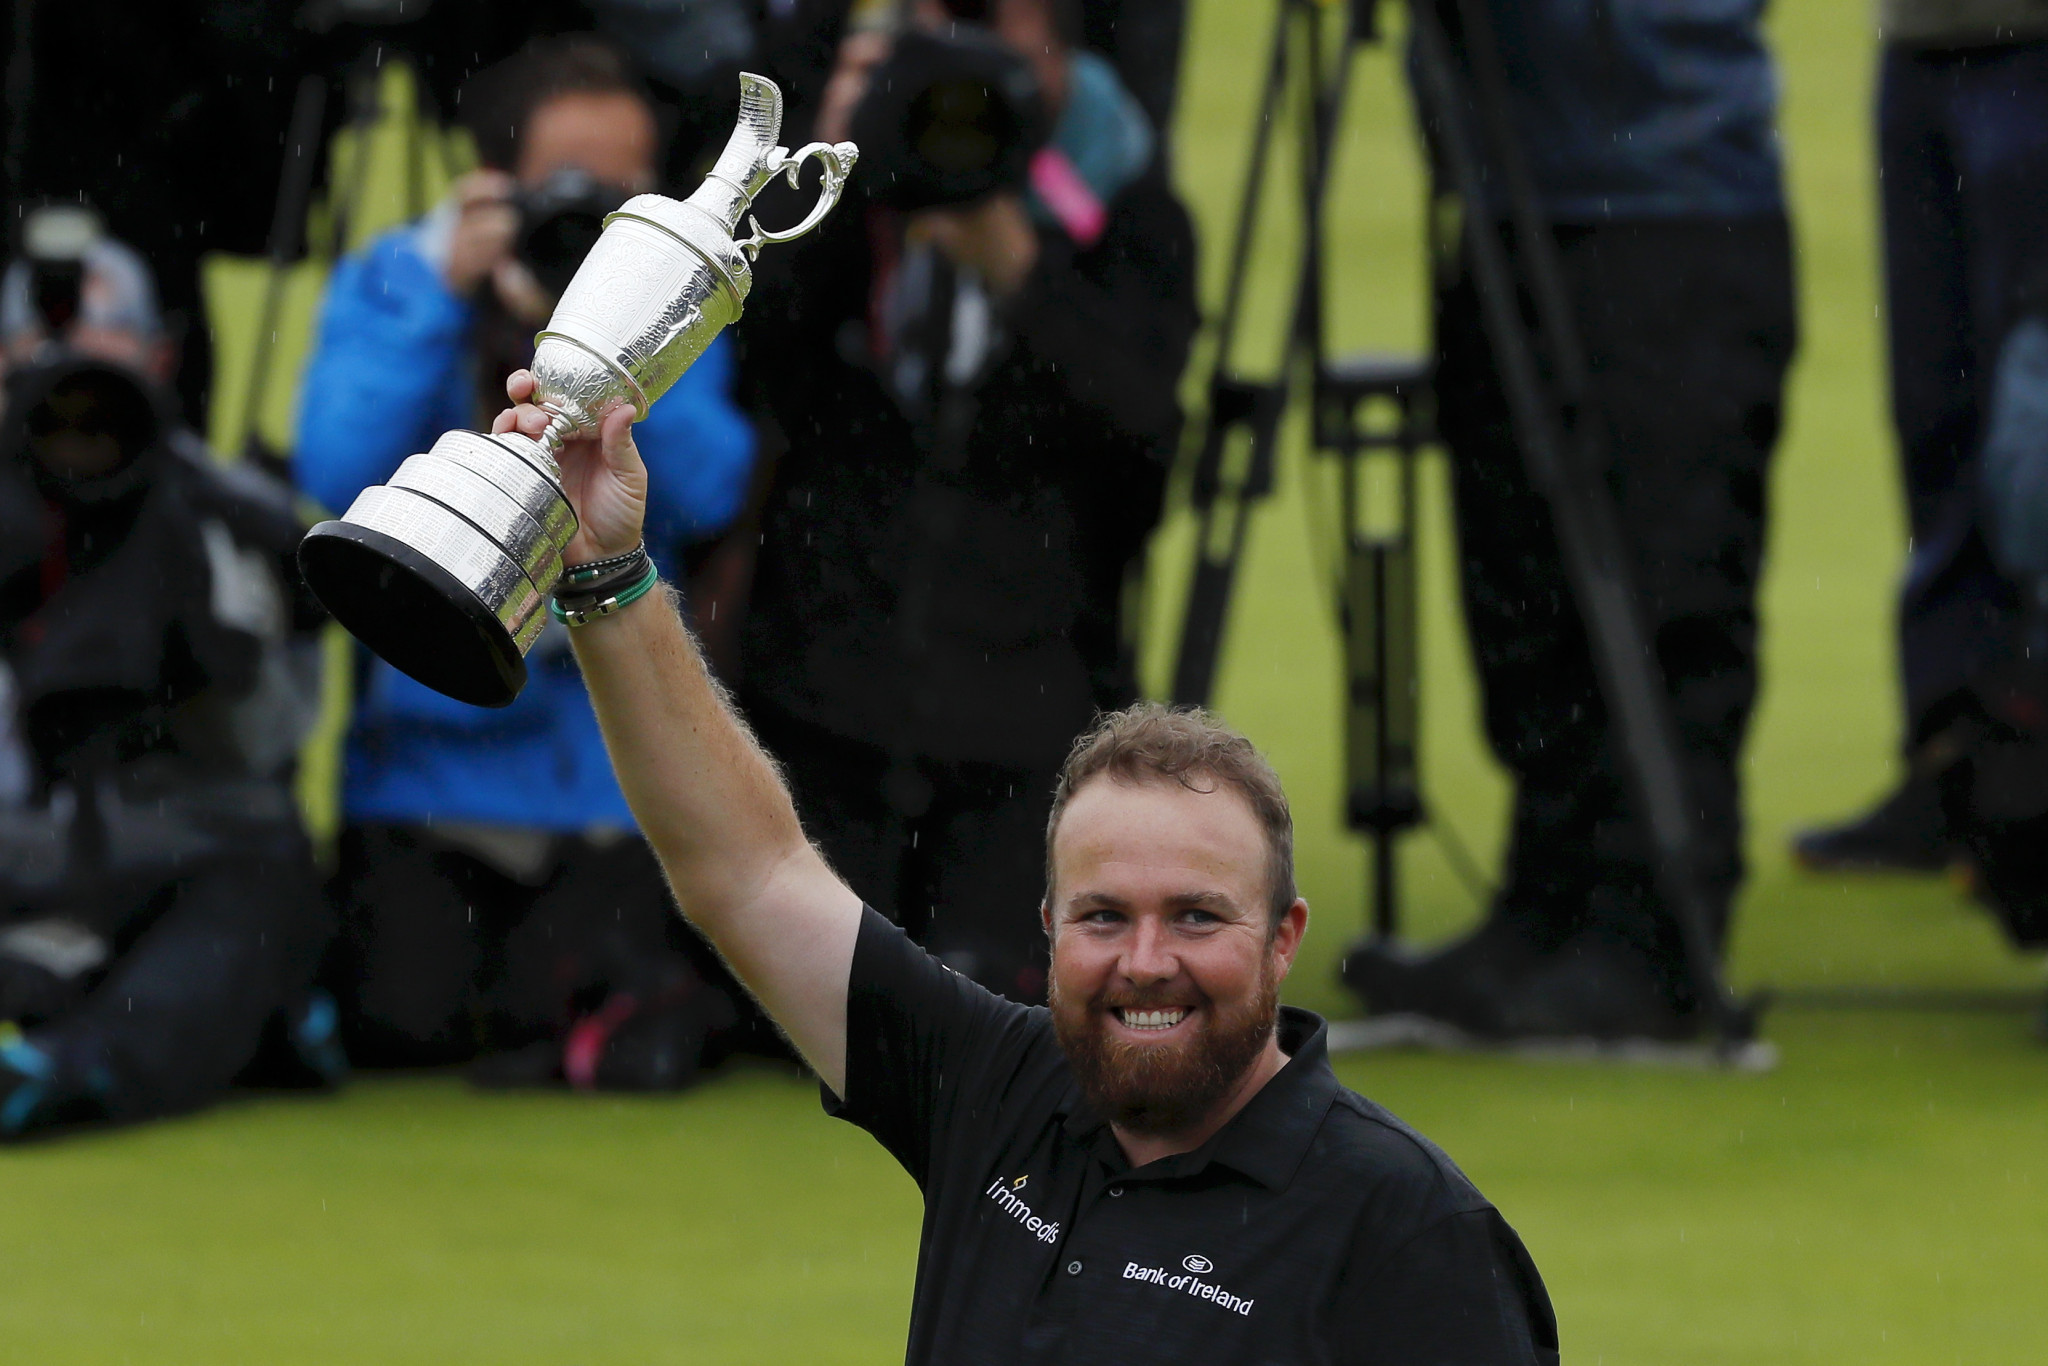 Ireland's Shane Lowry produced a composed final round at Royal Portrush ©Getty Images